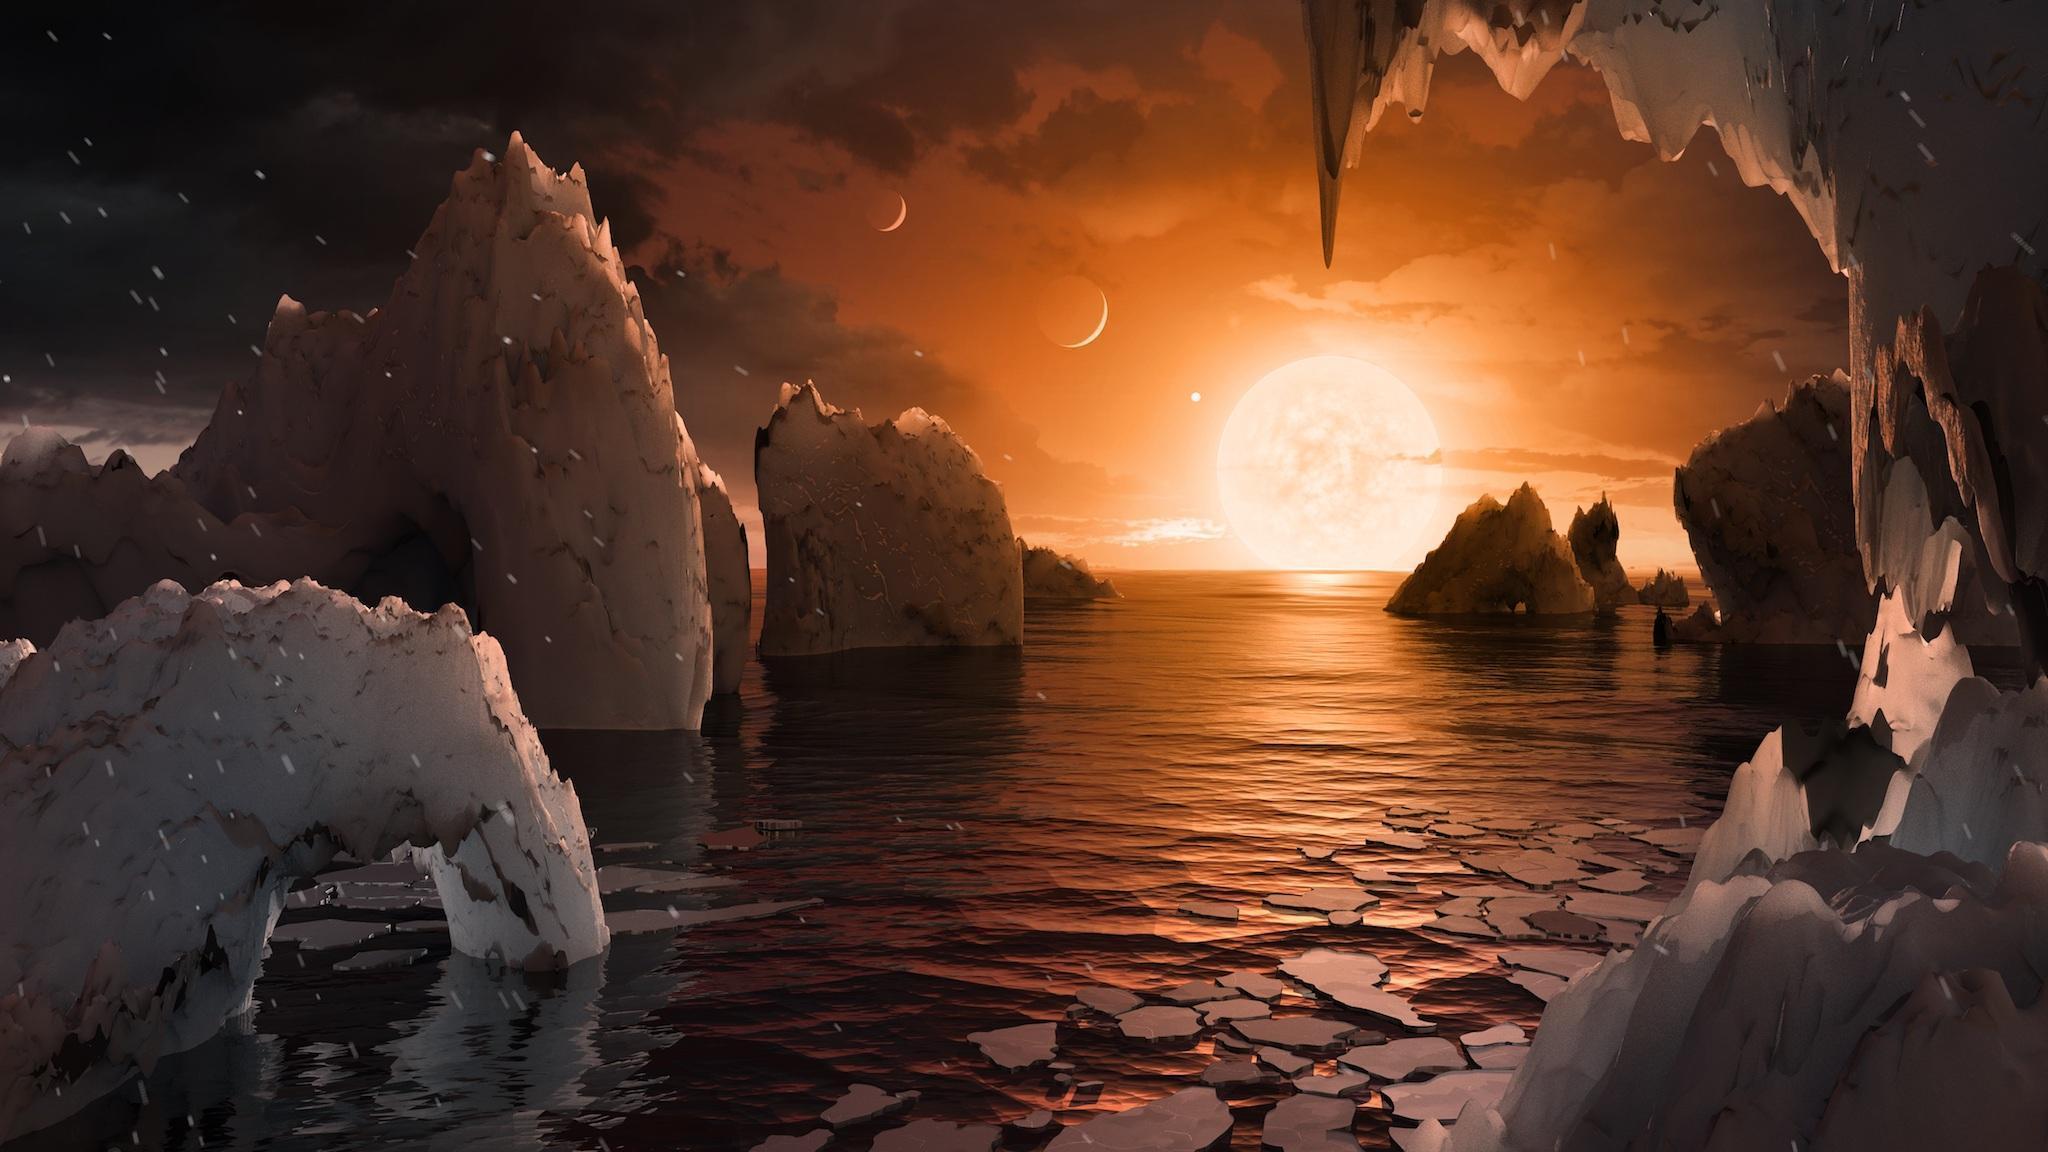 Solar systems could have a large number of planets that are home to alien life, study finds